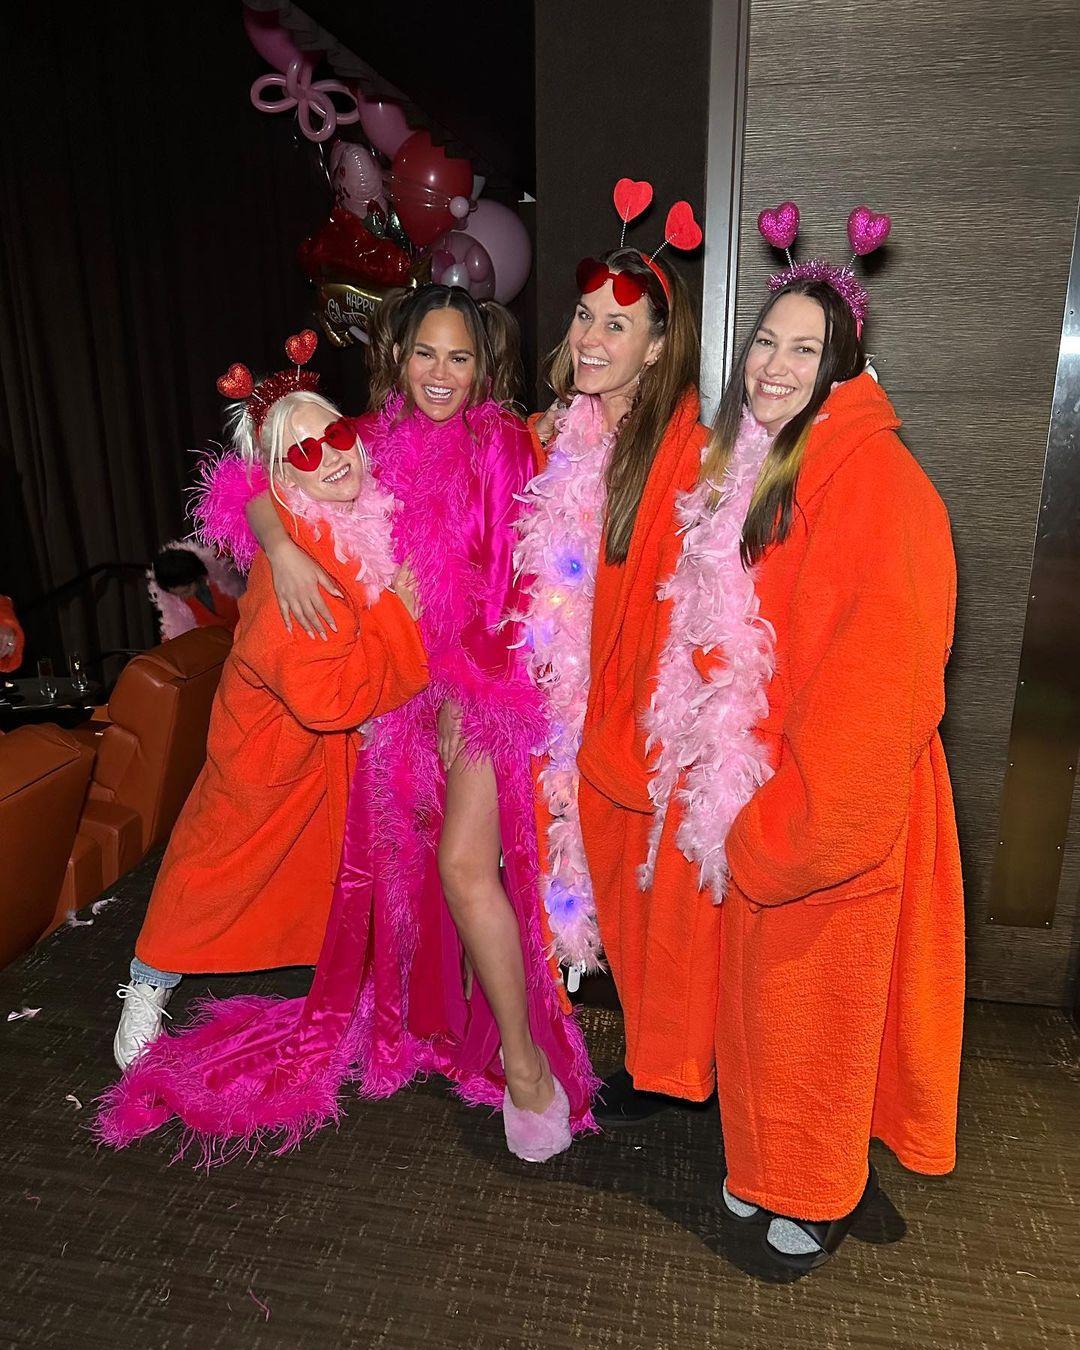 Chrissy Teigen Opts For 'Galentine Date' With Friends This Valentine